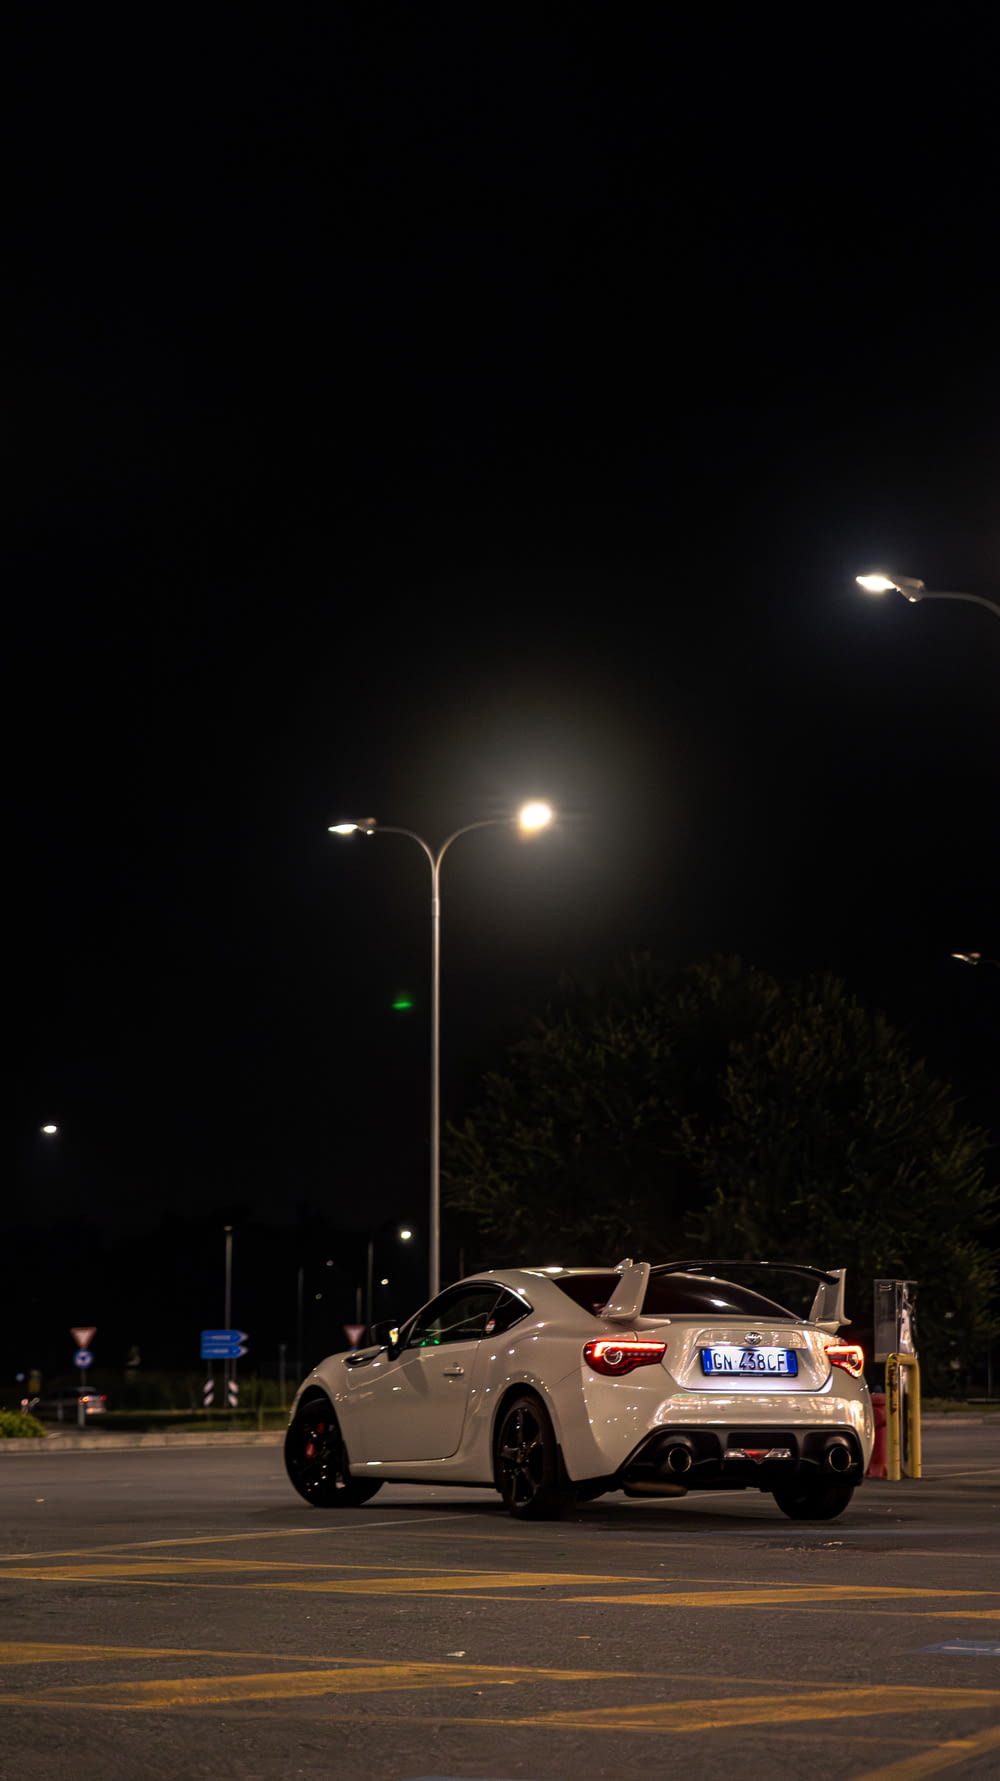 a white sports car parked in a parking lot at night